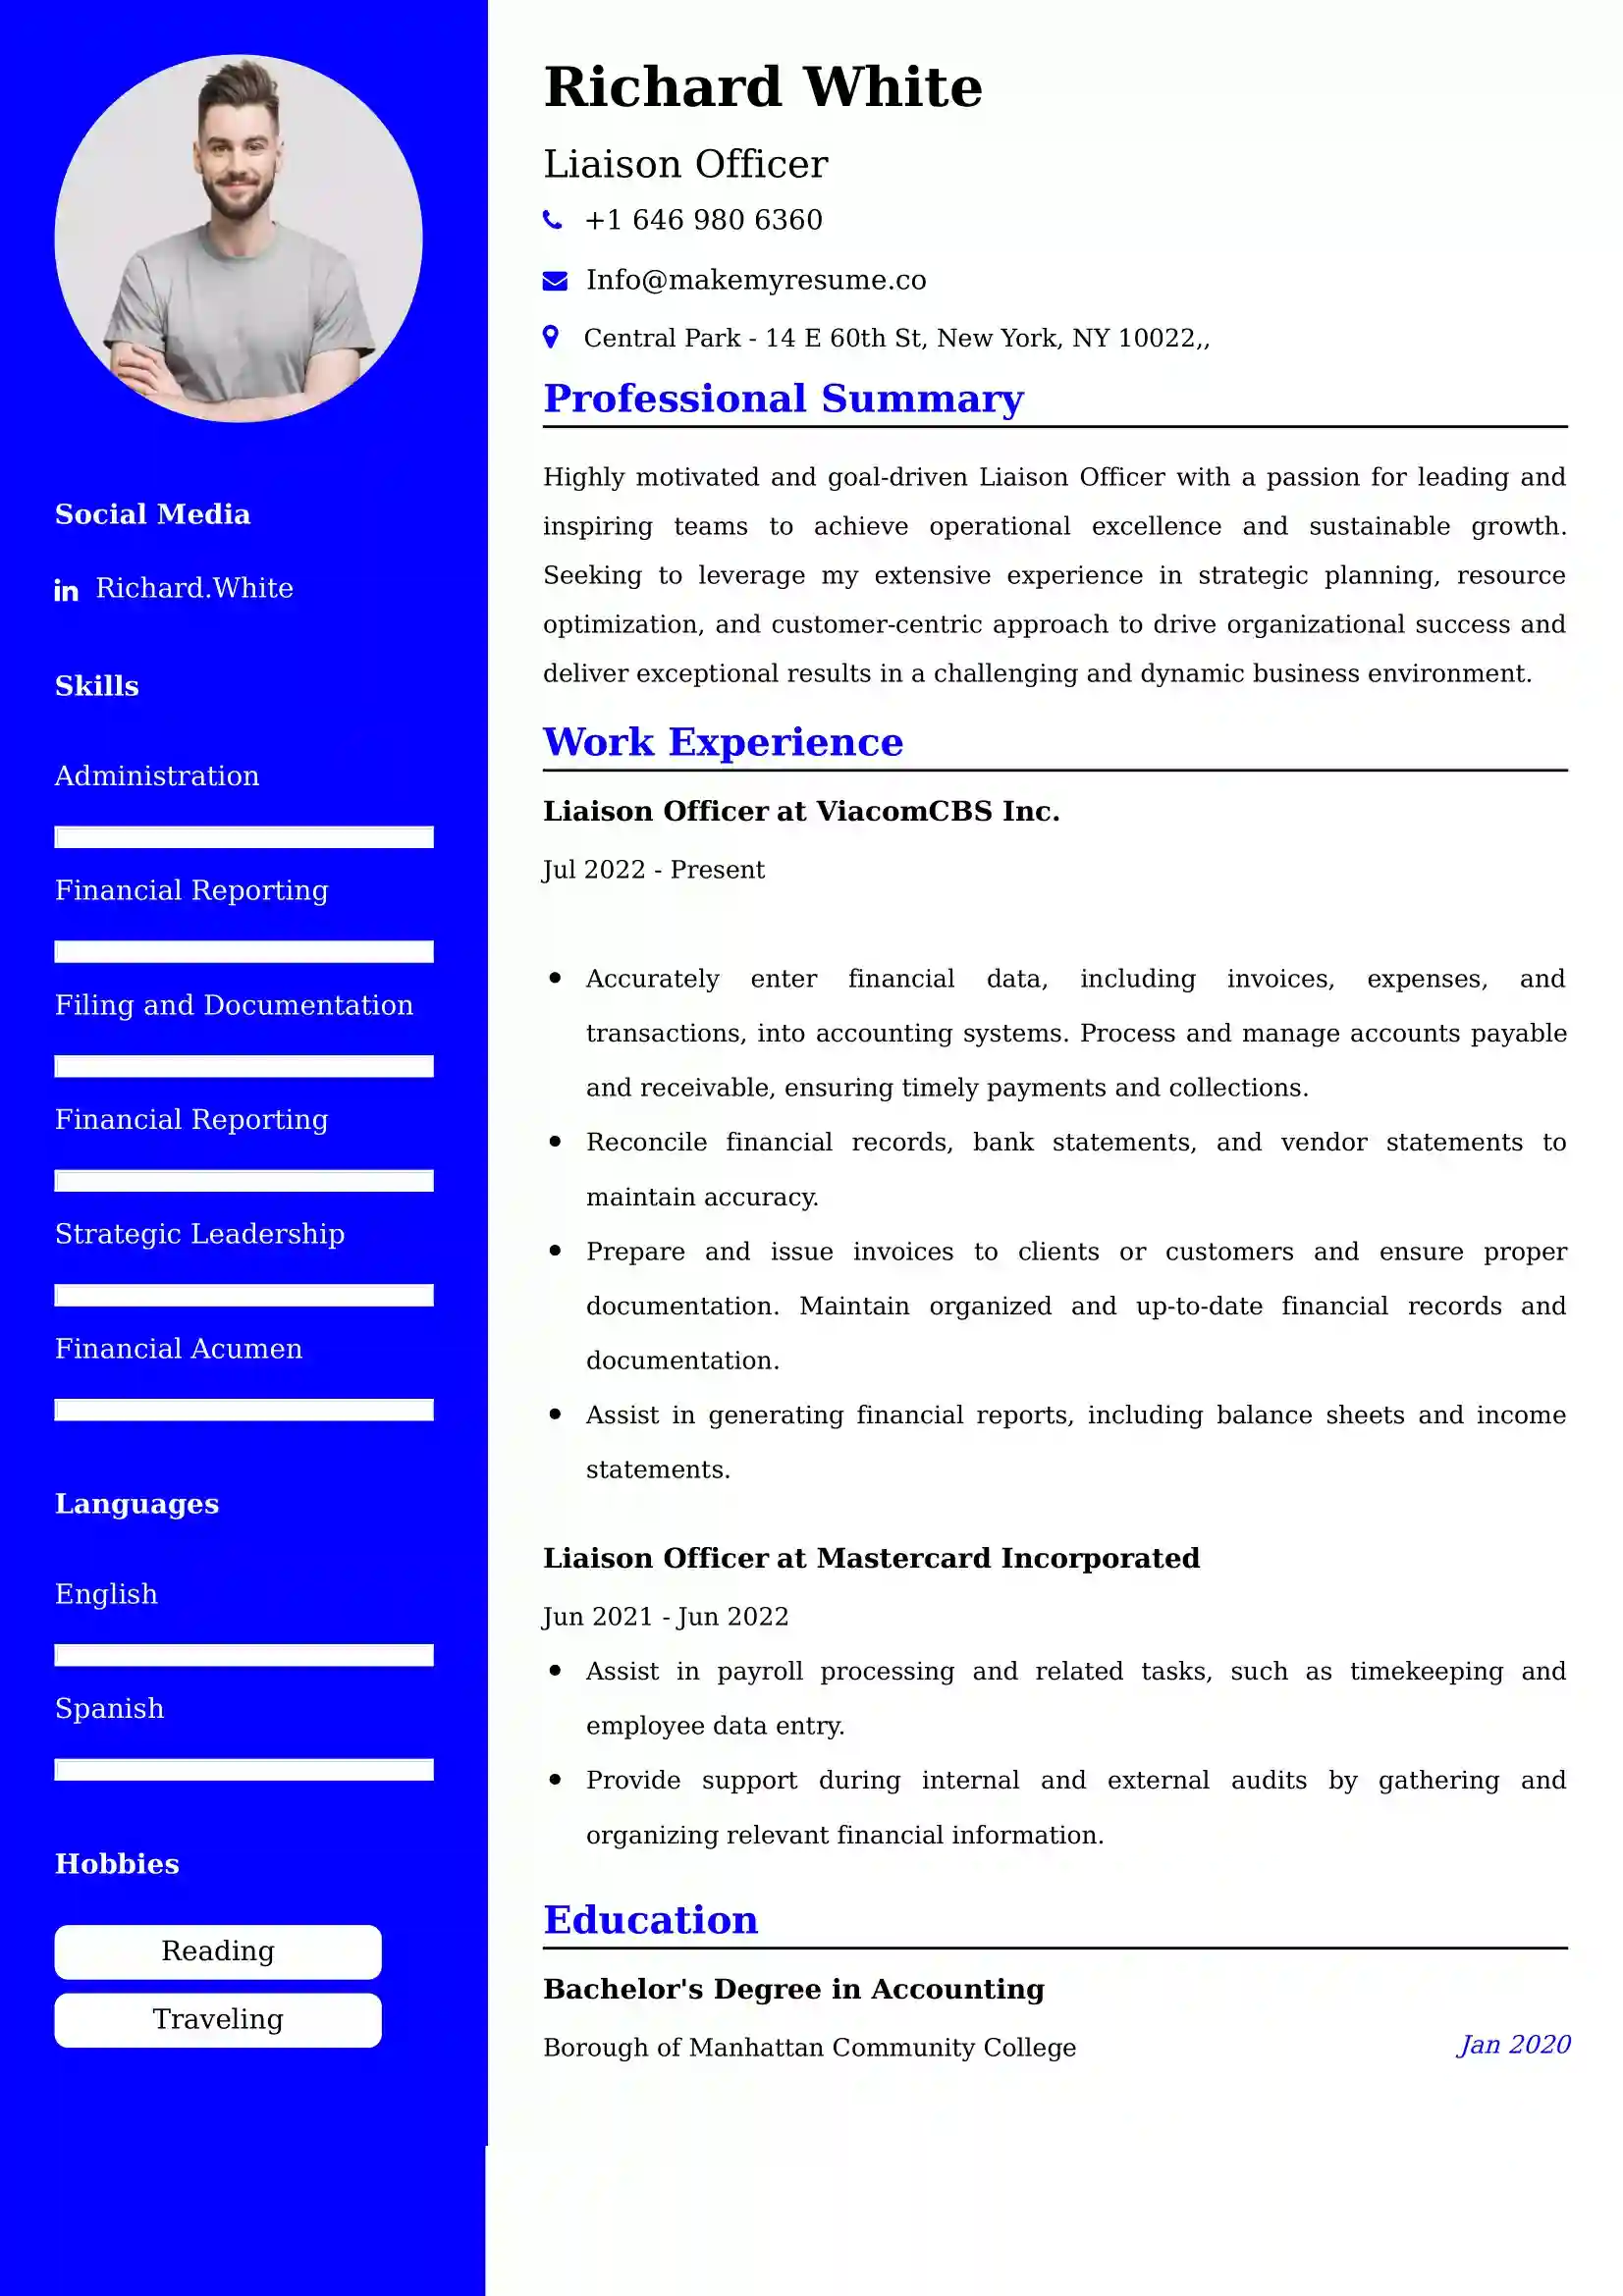 Liaison Officer Resume Examples - UAE Format and Tips.